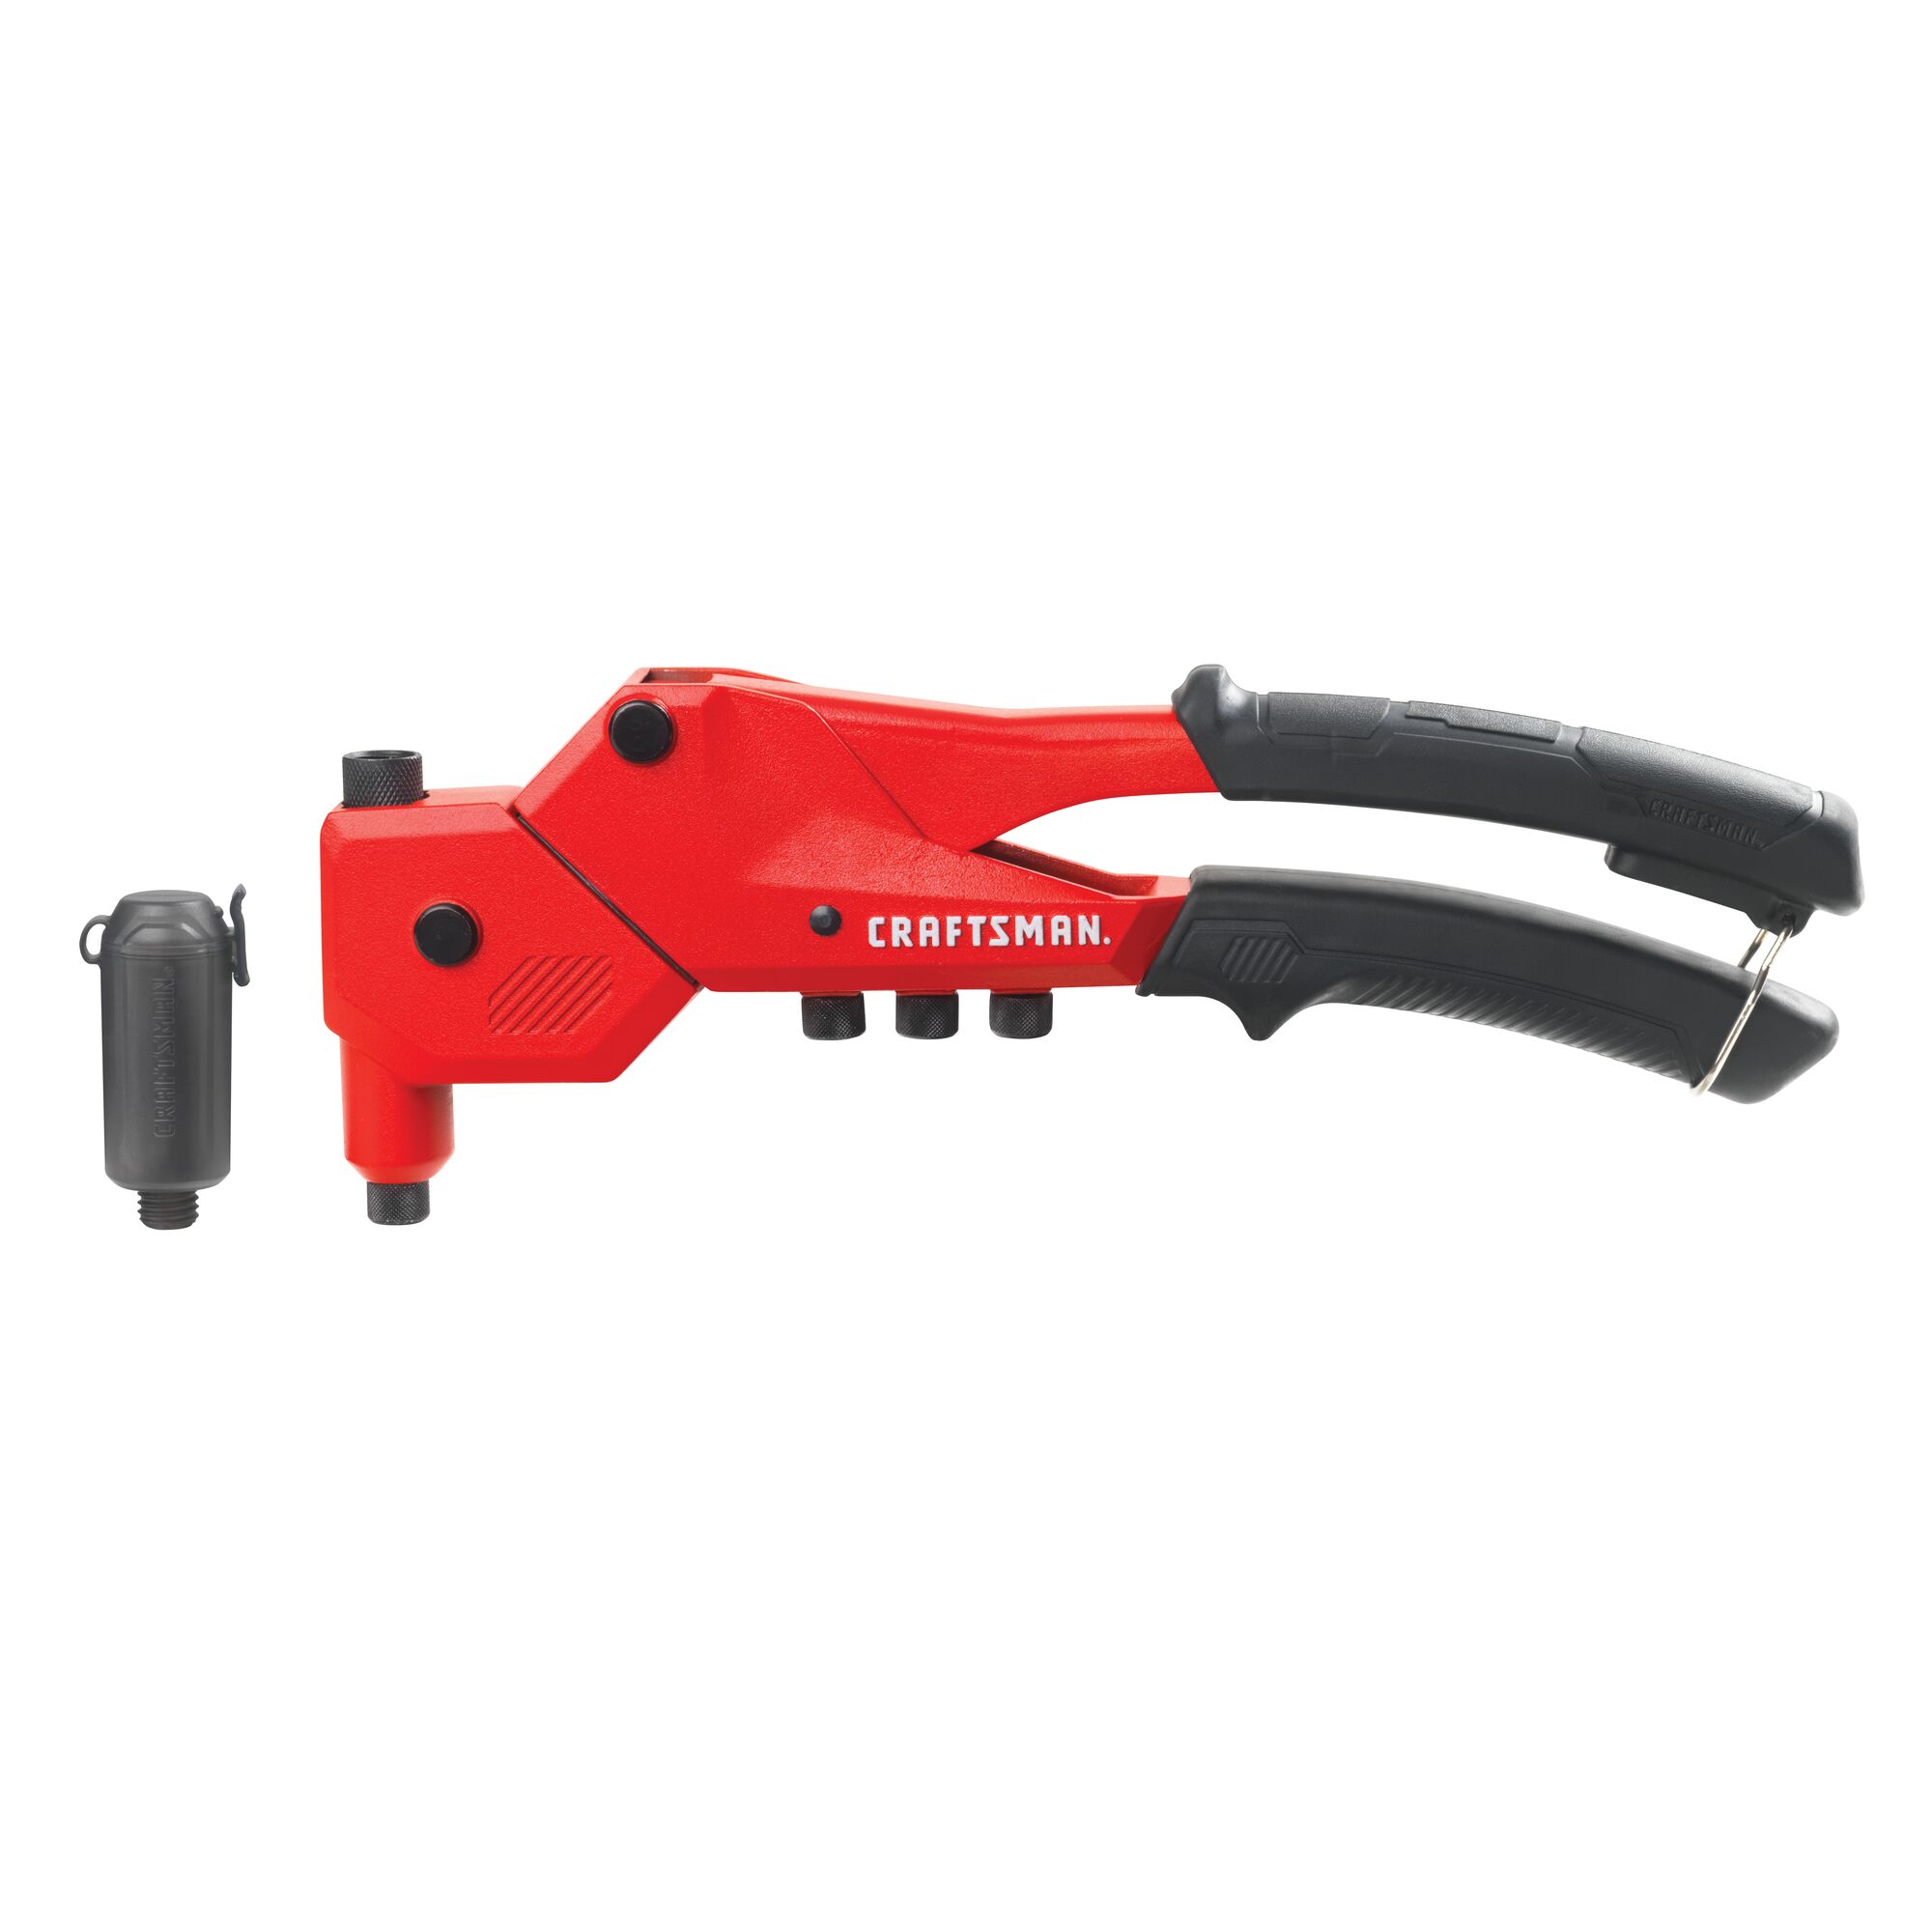 View of CRAFTSMAN Riveter on white background